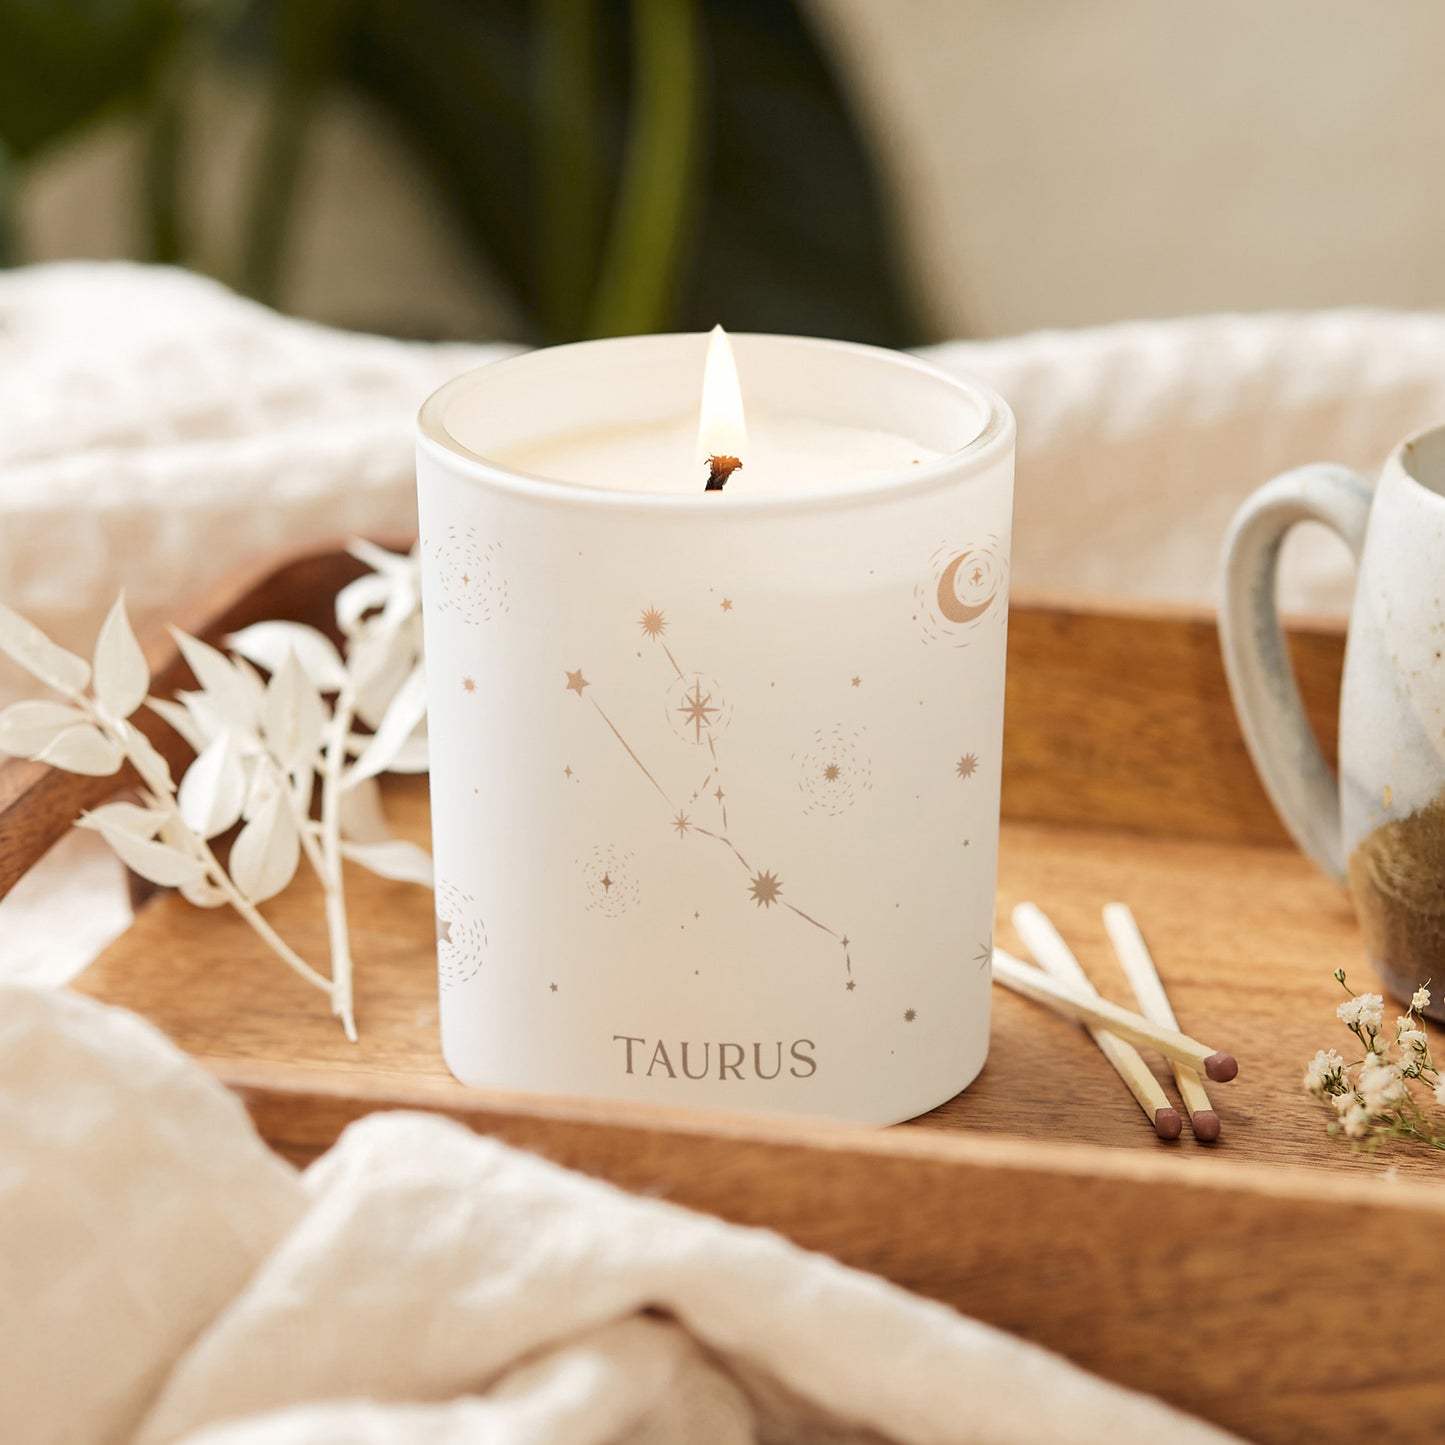 Taurus Star Sign Candle Gift Zodiac Constellation Glow Through Candle